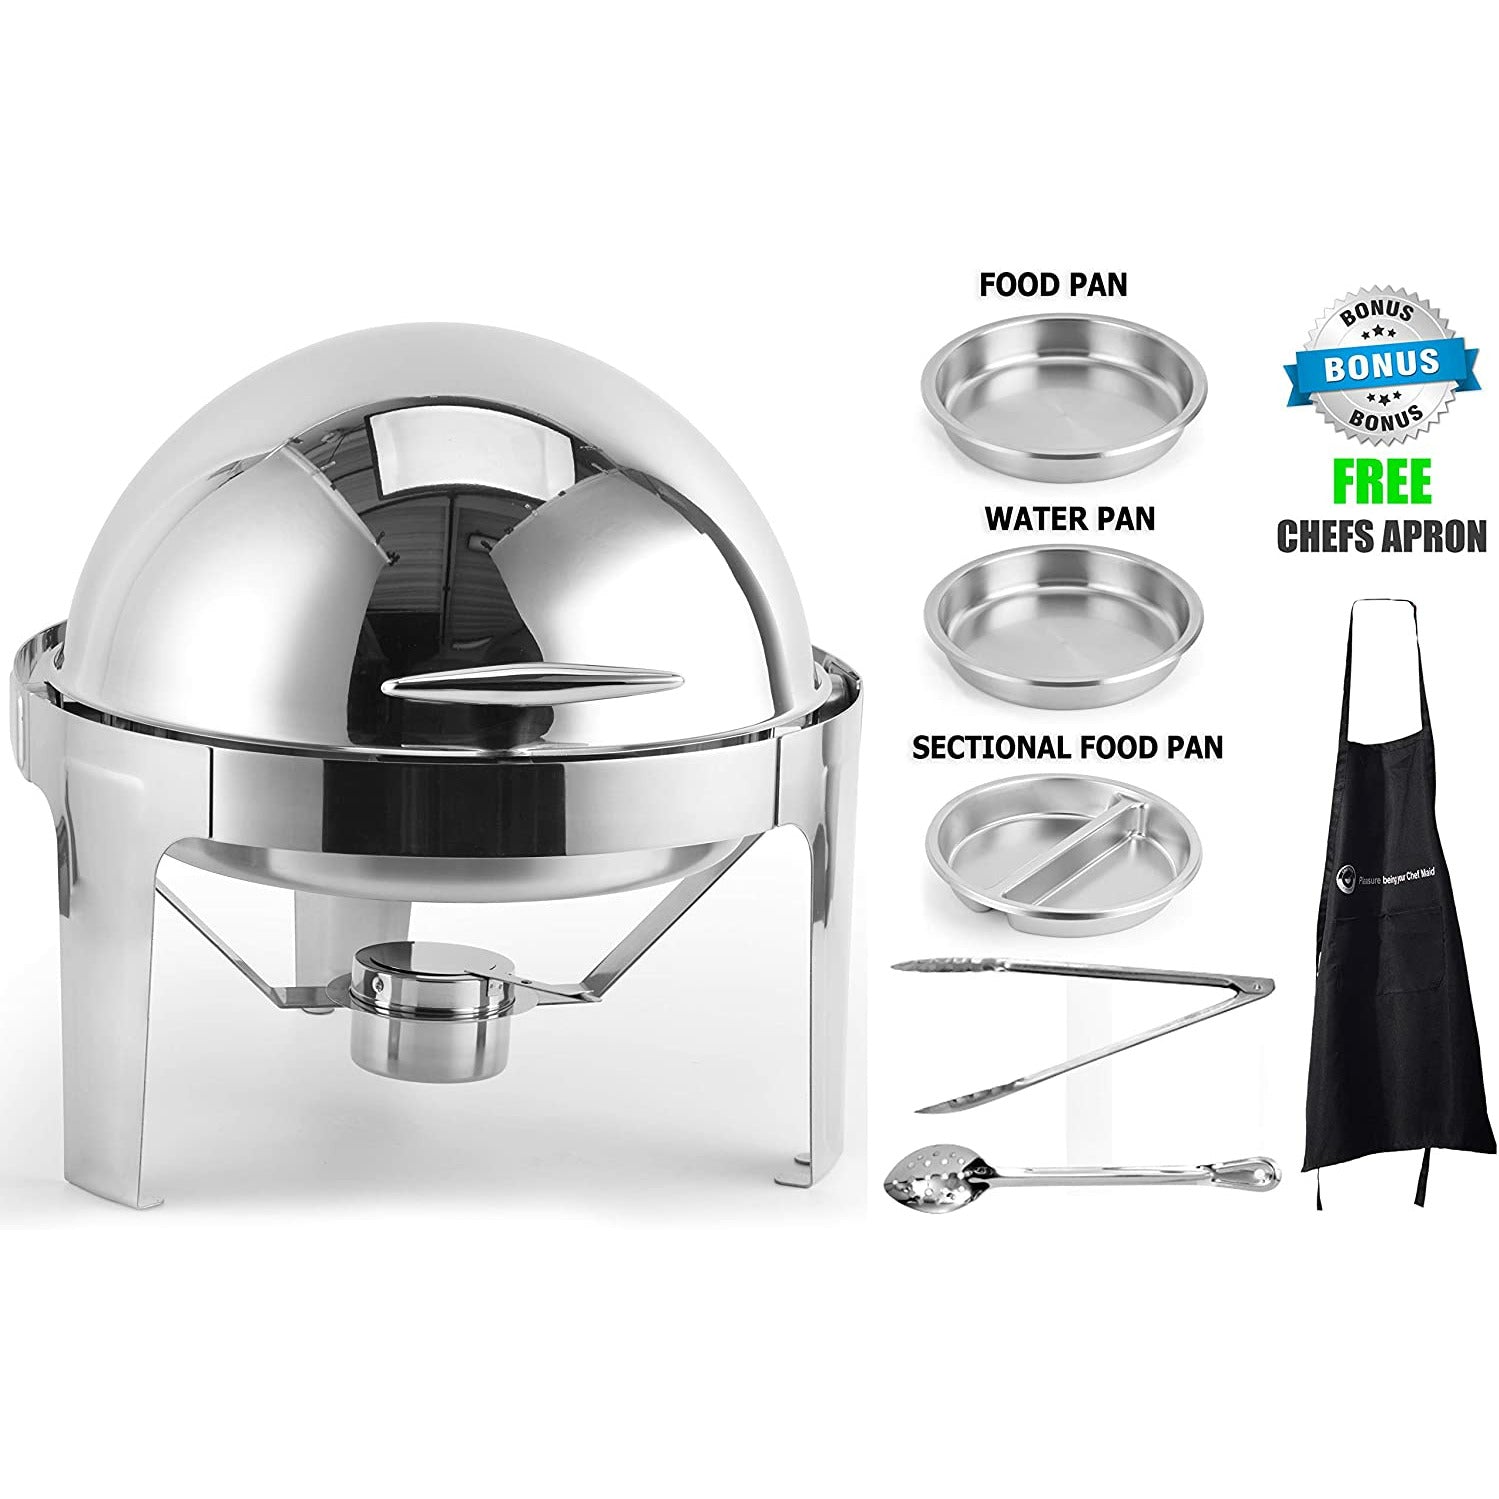 Chafer Chafing Dish Round Roll Top Bundle Stainless Steel 6 Quart